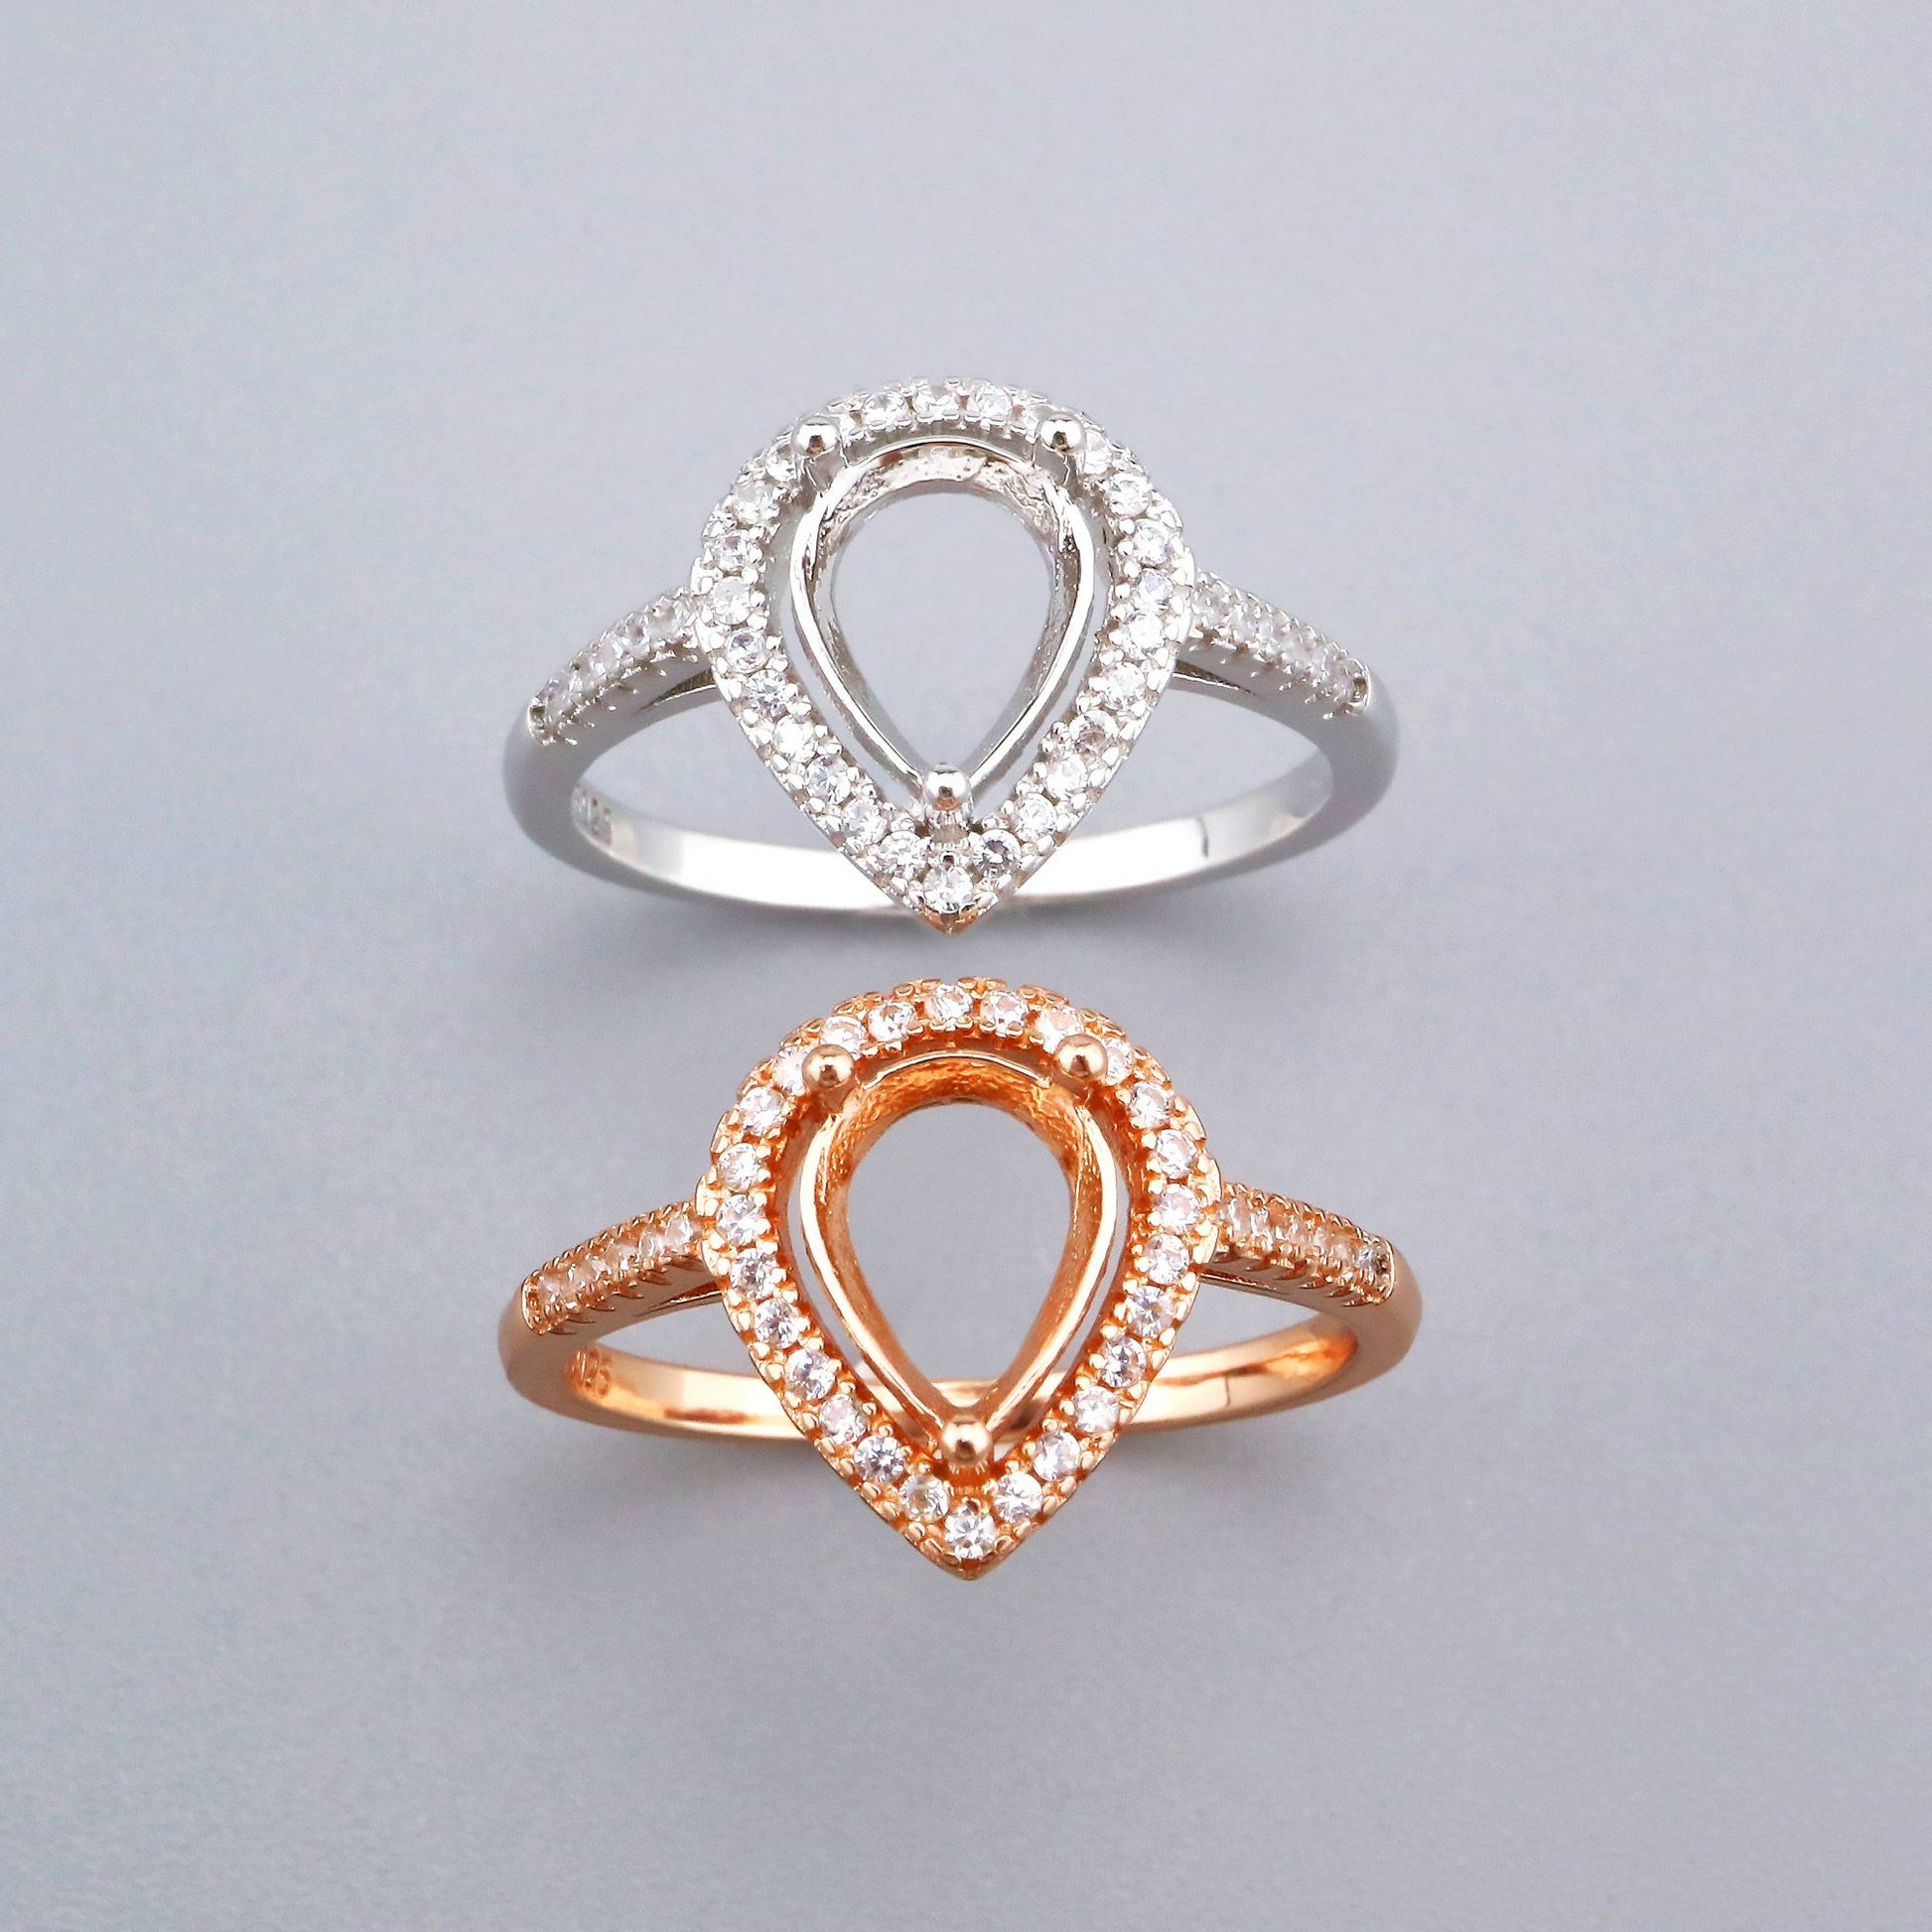 One silver and one rose gold tear drop shaped halo semi mount settings.